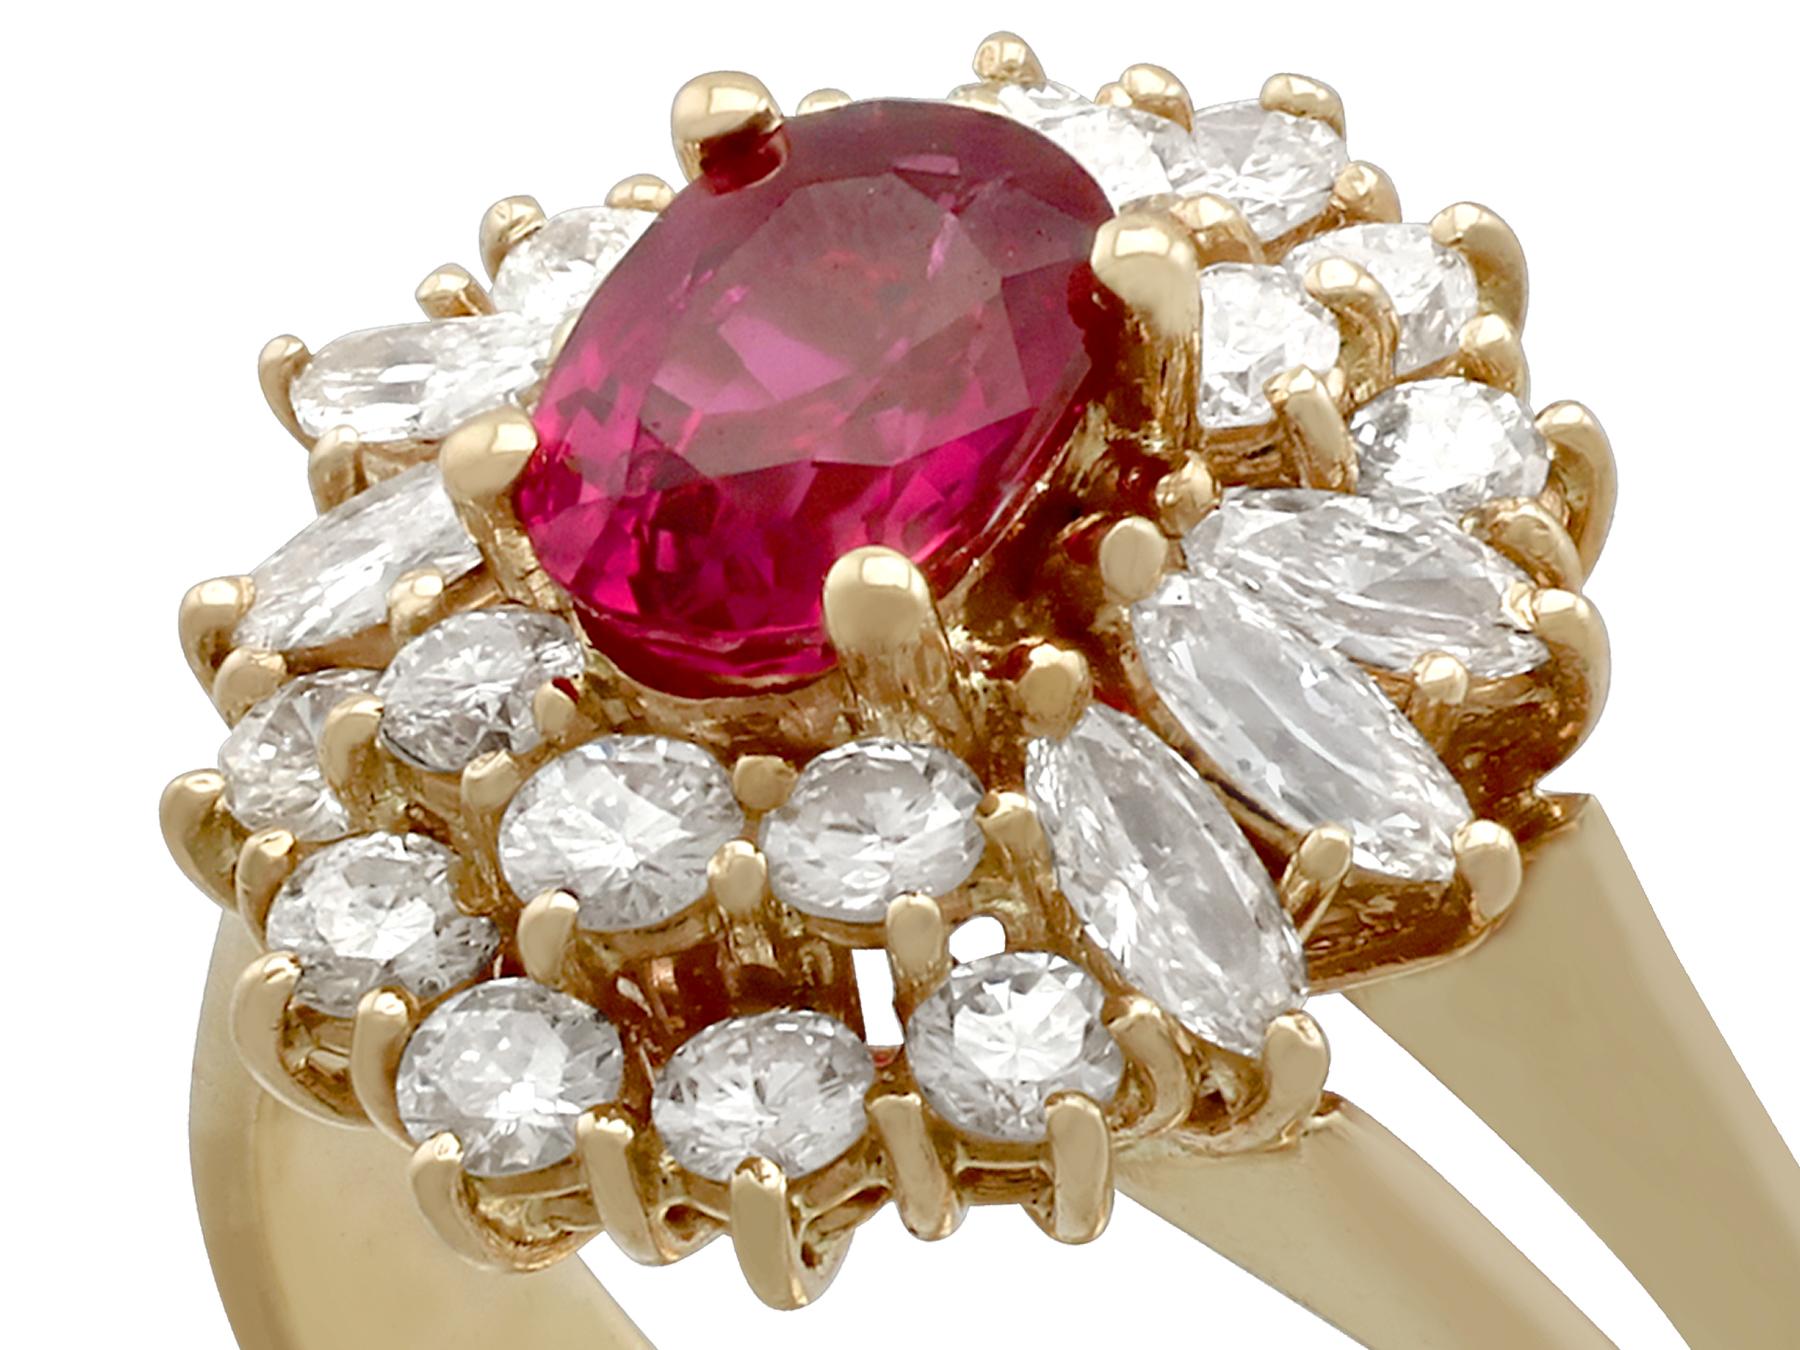 A fine and impressive vintage 0.92 carat natural ruby and 0.65 carat diamond, 14 karat yellow gold cluster ring; part of our vintage jewelry and estate jewelry collections.

This impressive vintage ruby cluster ring has been crafted in 14k yellow